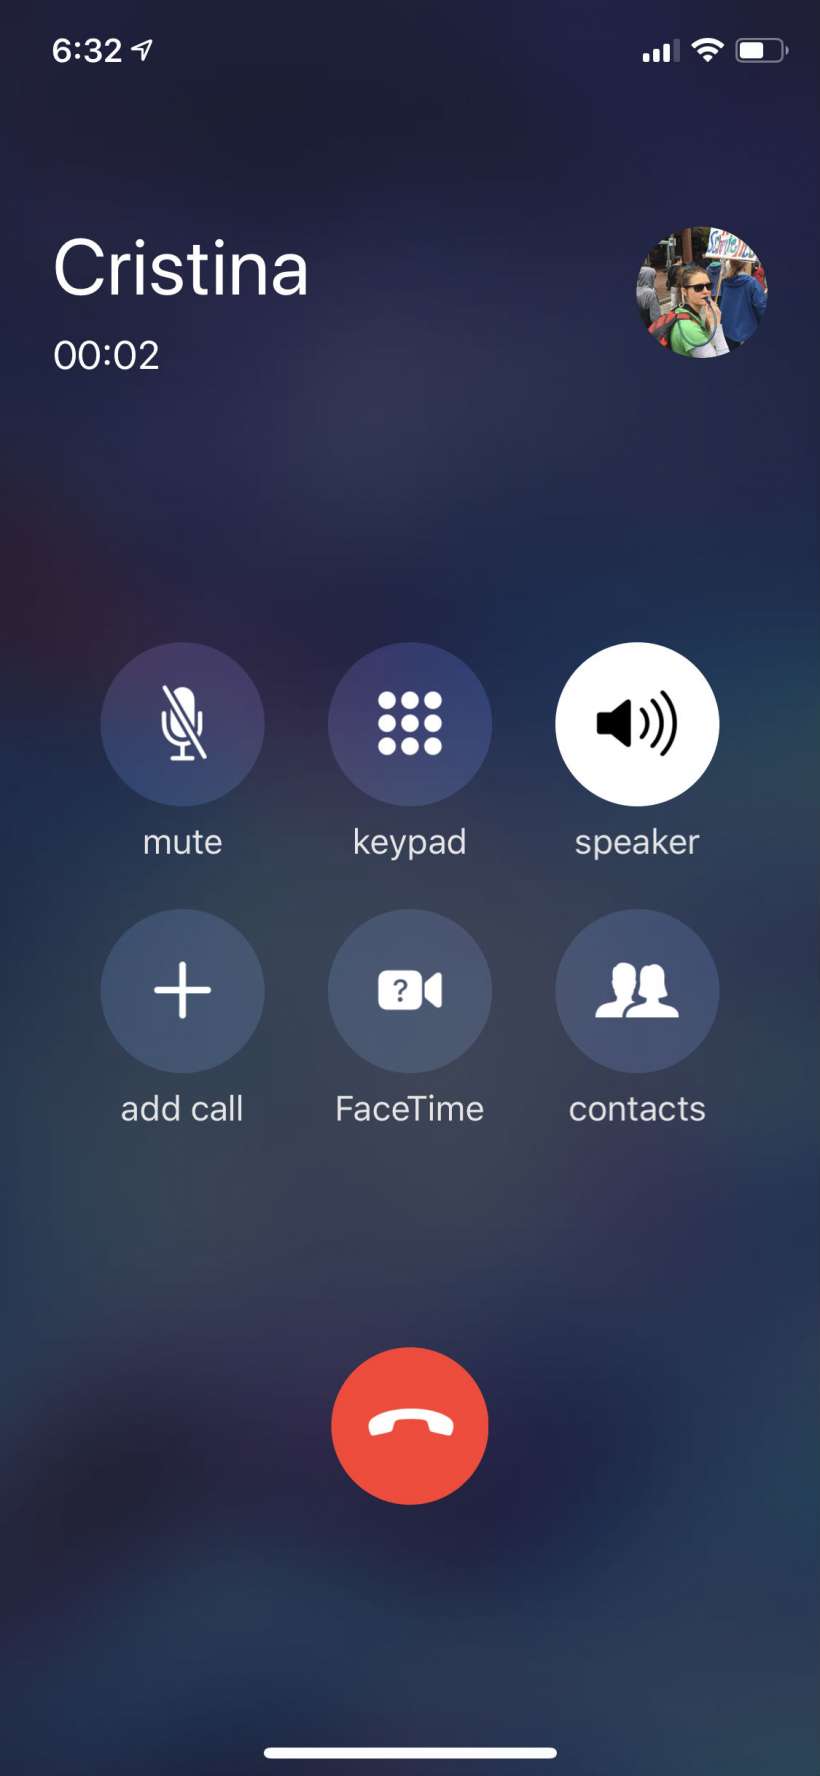 How to automatically turn on speakerphone on iPhone.